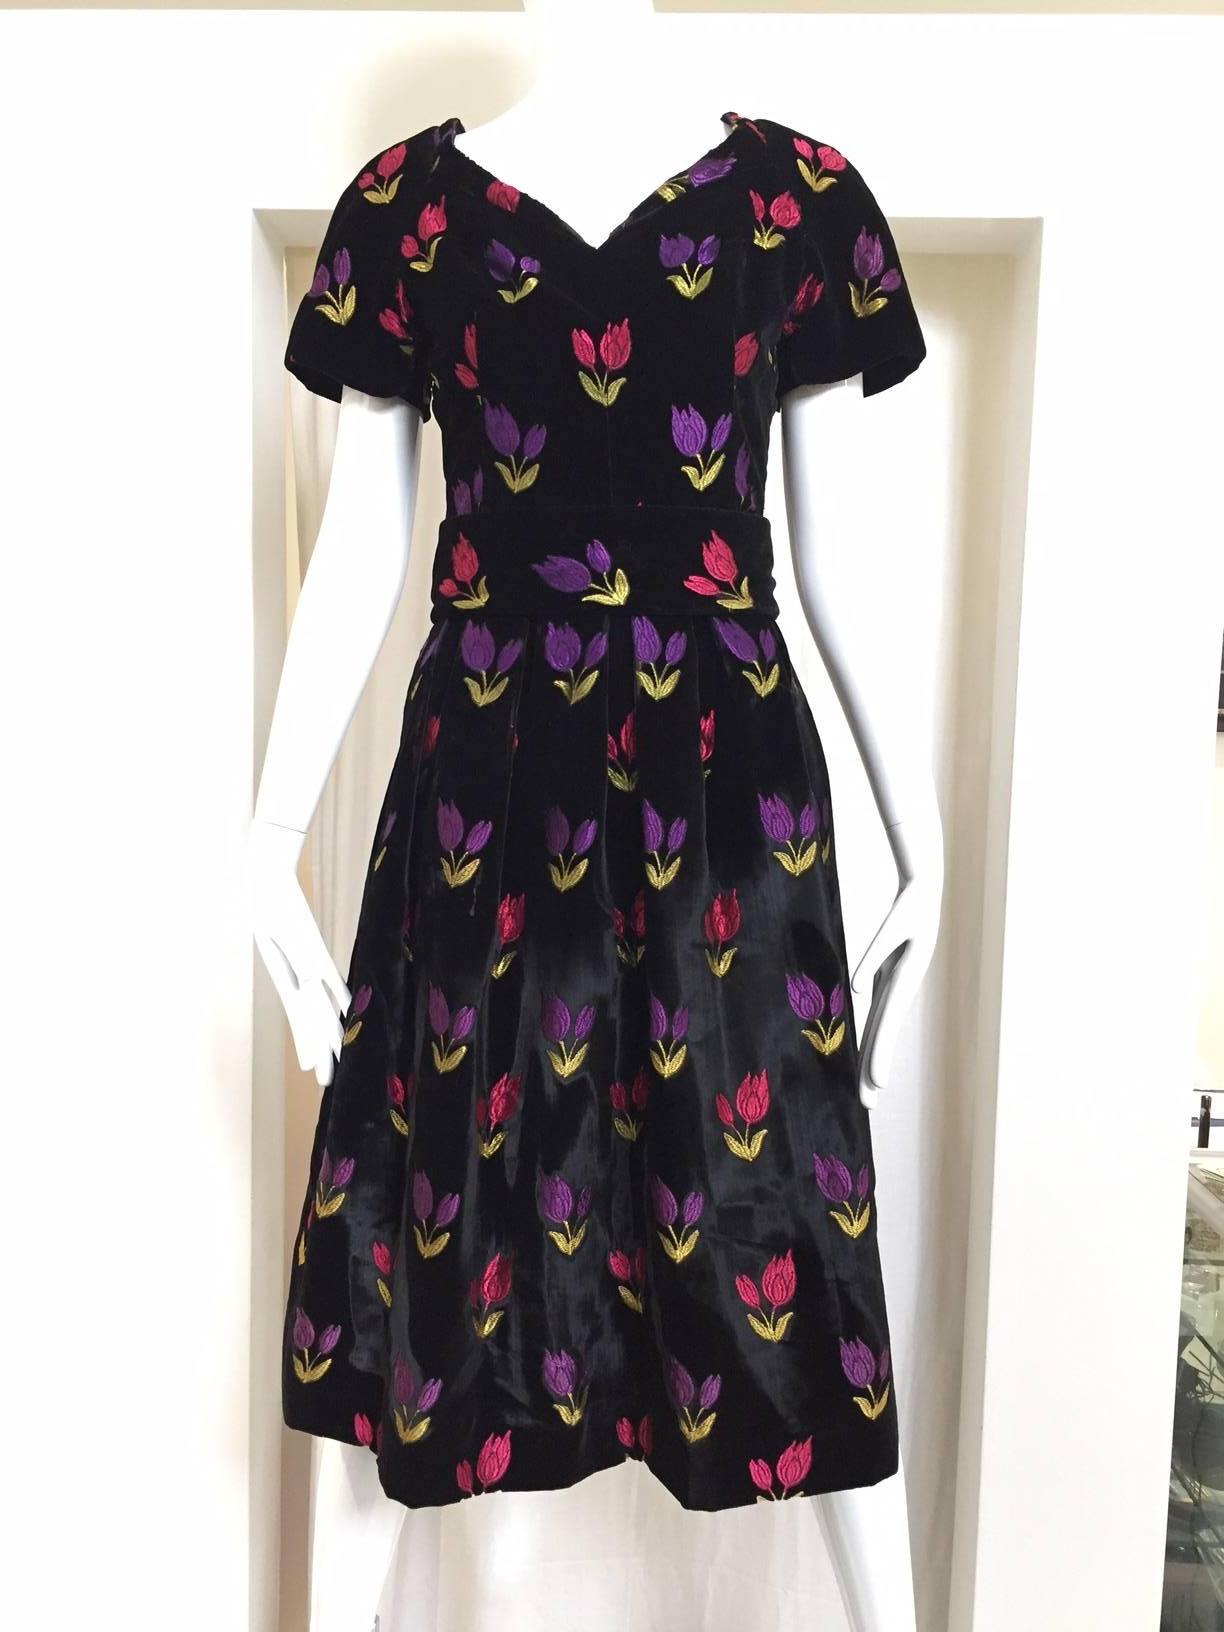 Women's 1950s Black Velvet Cocktail Dress with Tulip Embroidery